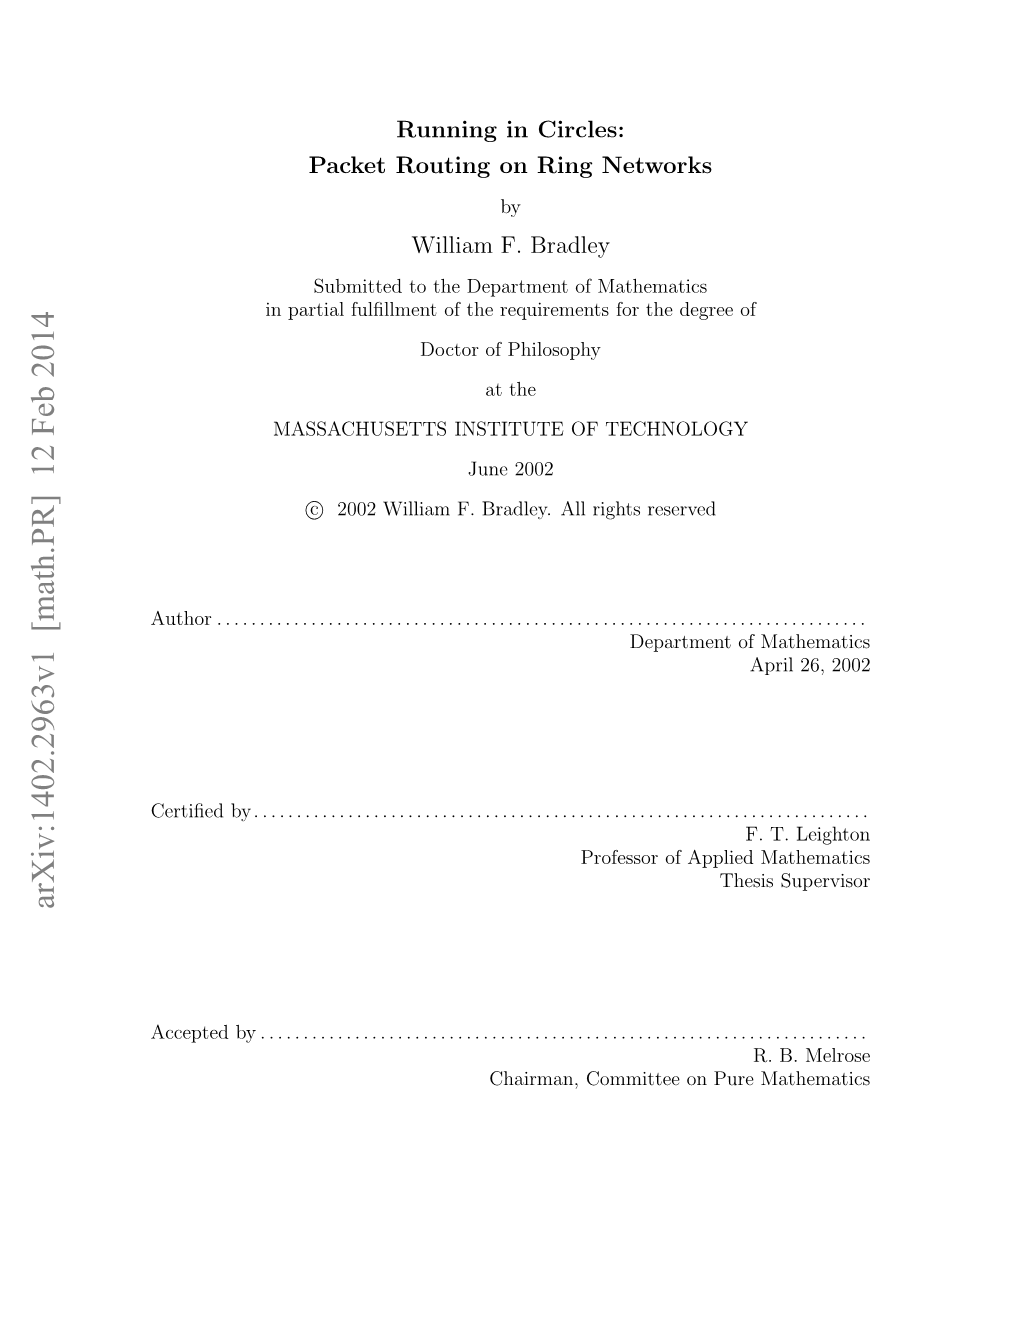 Running in Circles: Packet Routing on Ring Networks by William F